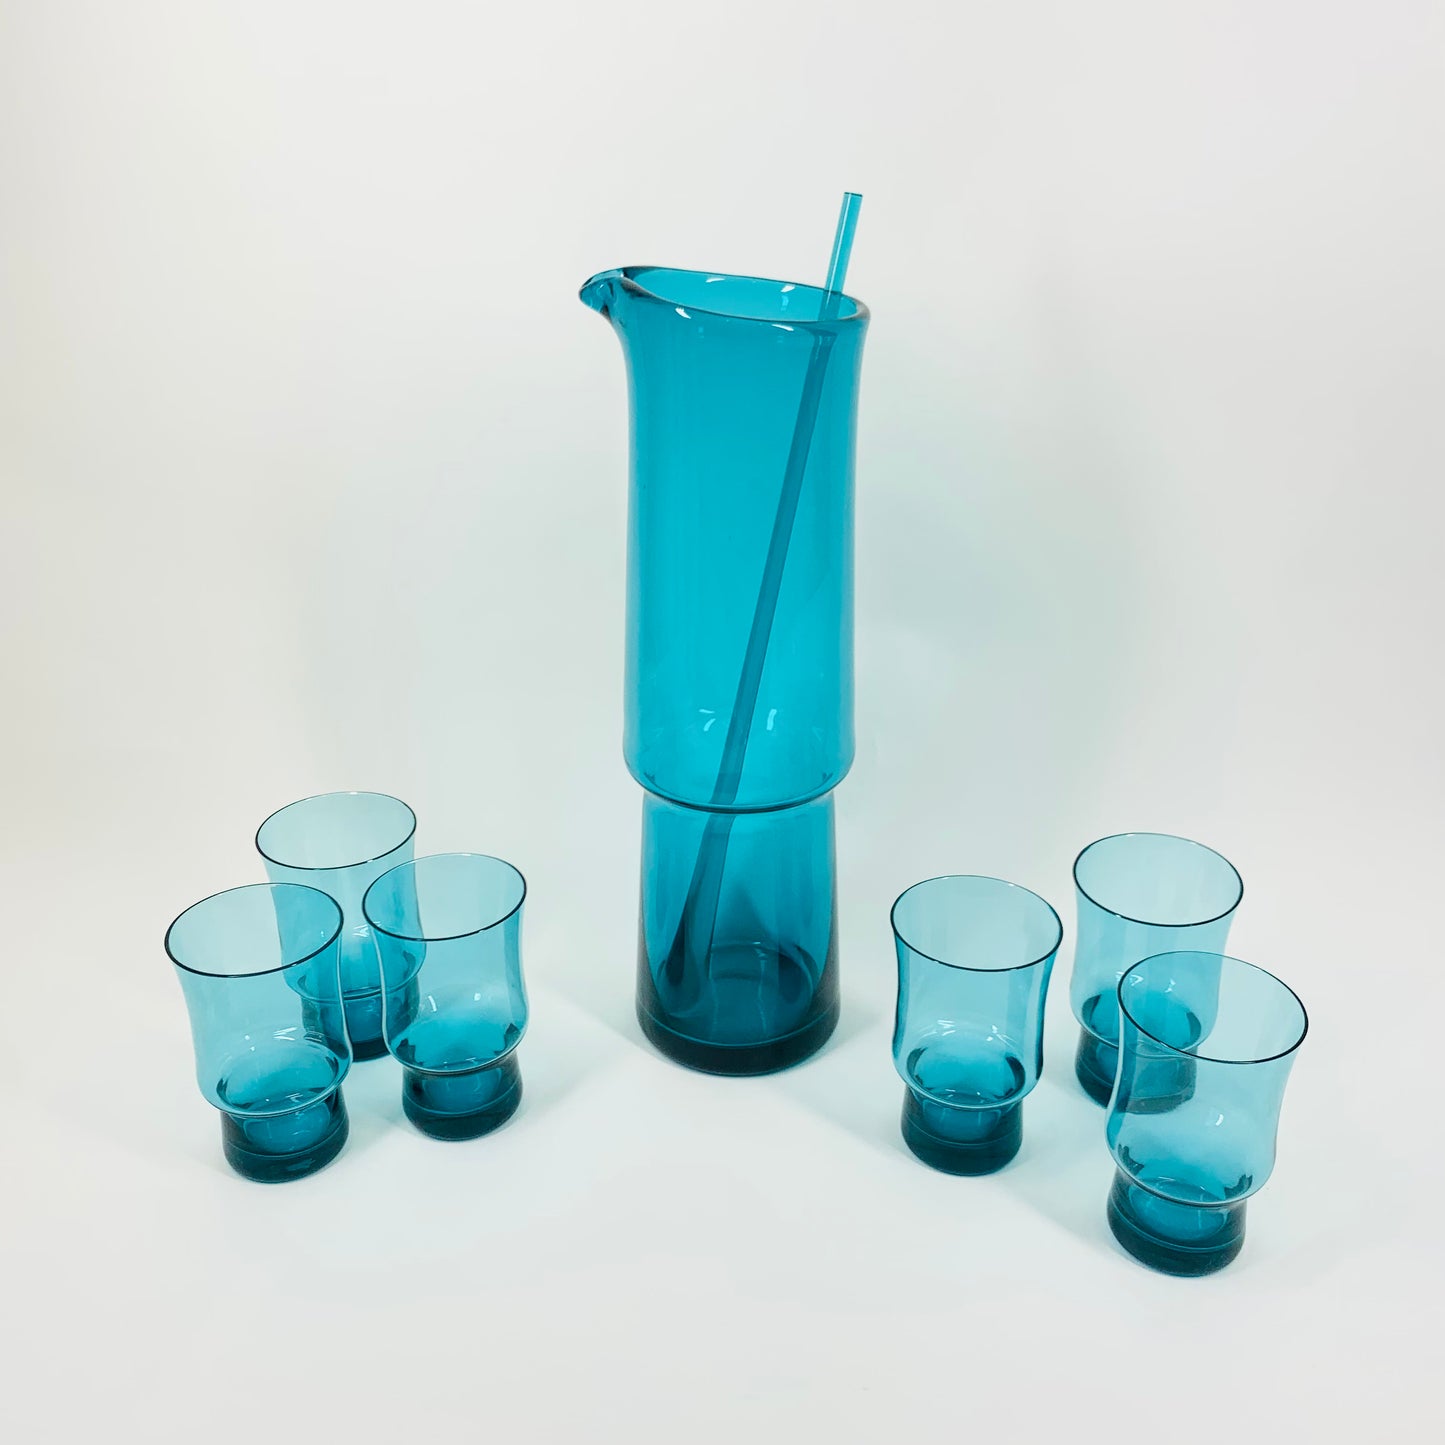 Rare complete Space Age Swedish turquoise blue glass pitcher/jug set with matching glasses and swizzle stick